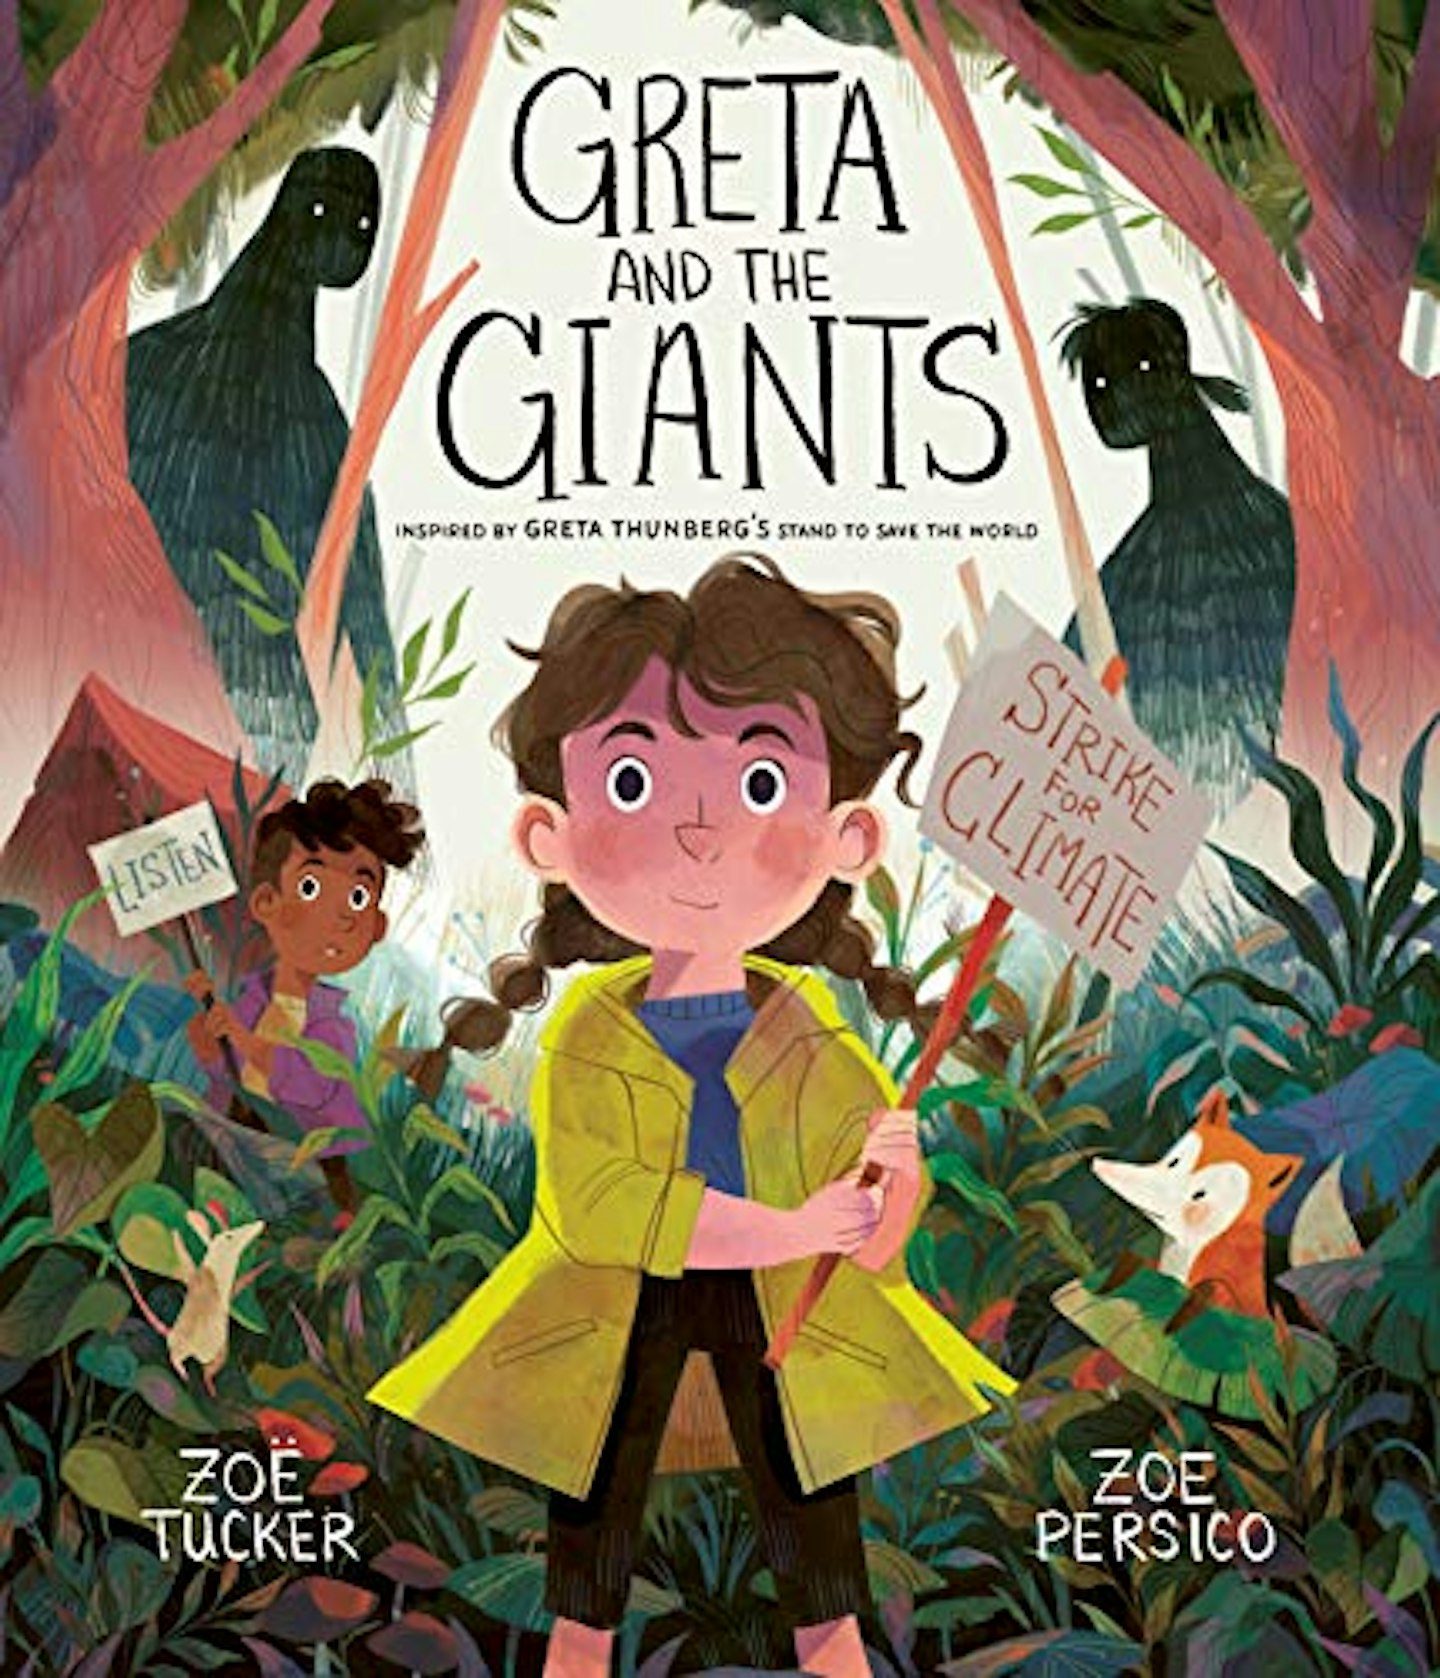 Greta and the Giants: inspired by Greta Thunbergu0026#039;s stand to save the world by Zoe Tucker